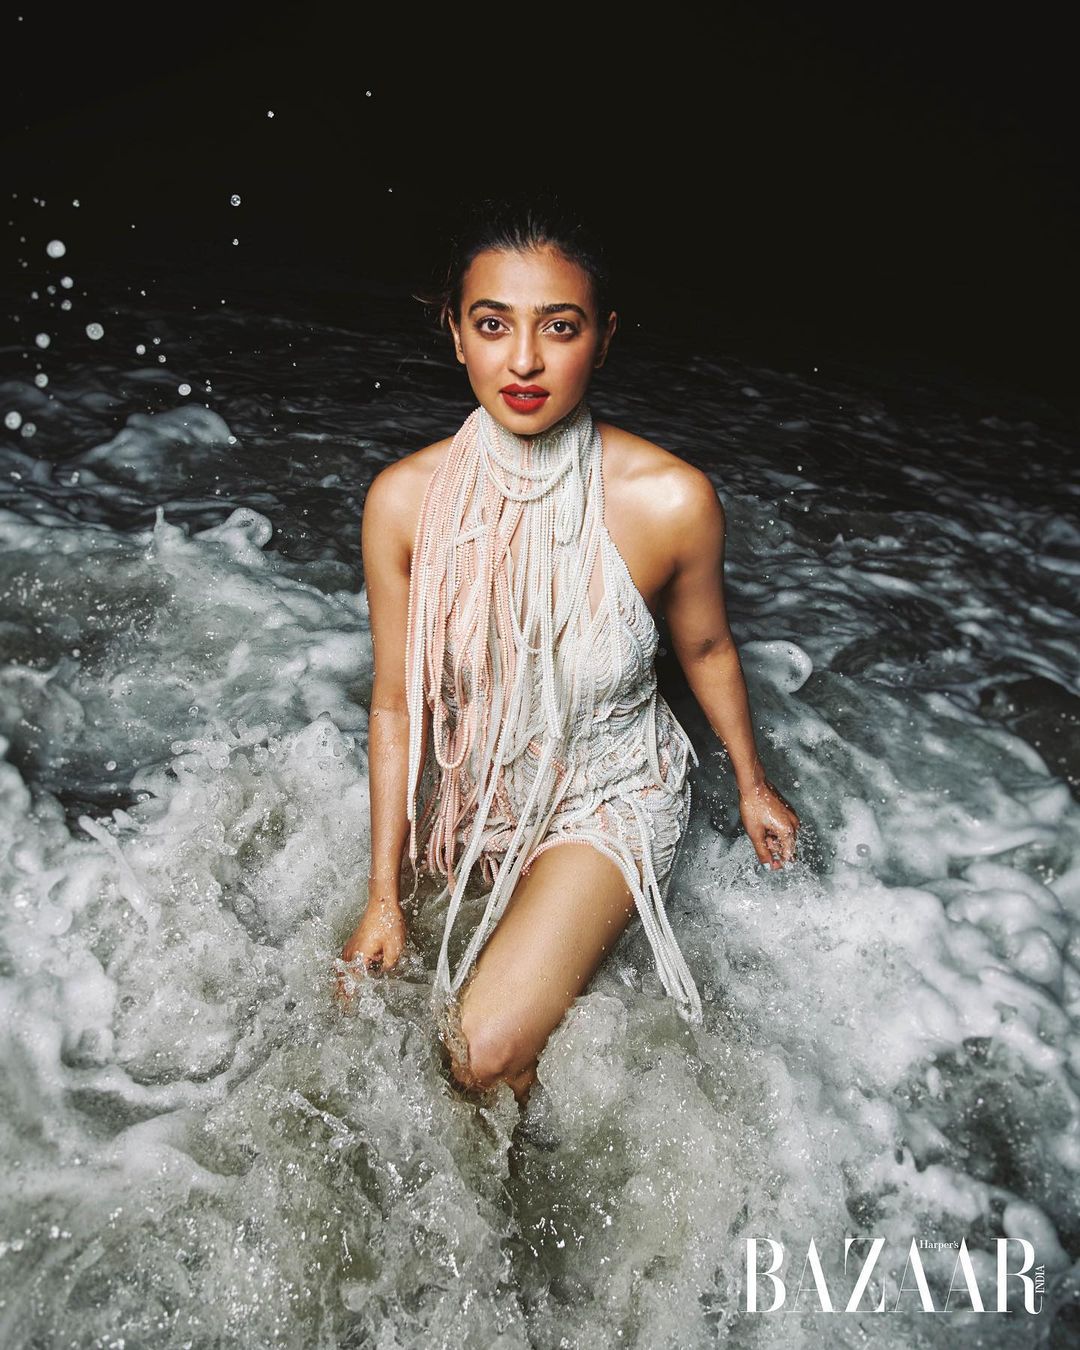 Radhika Apte looks stunning in the knotted dress